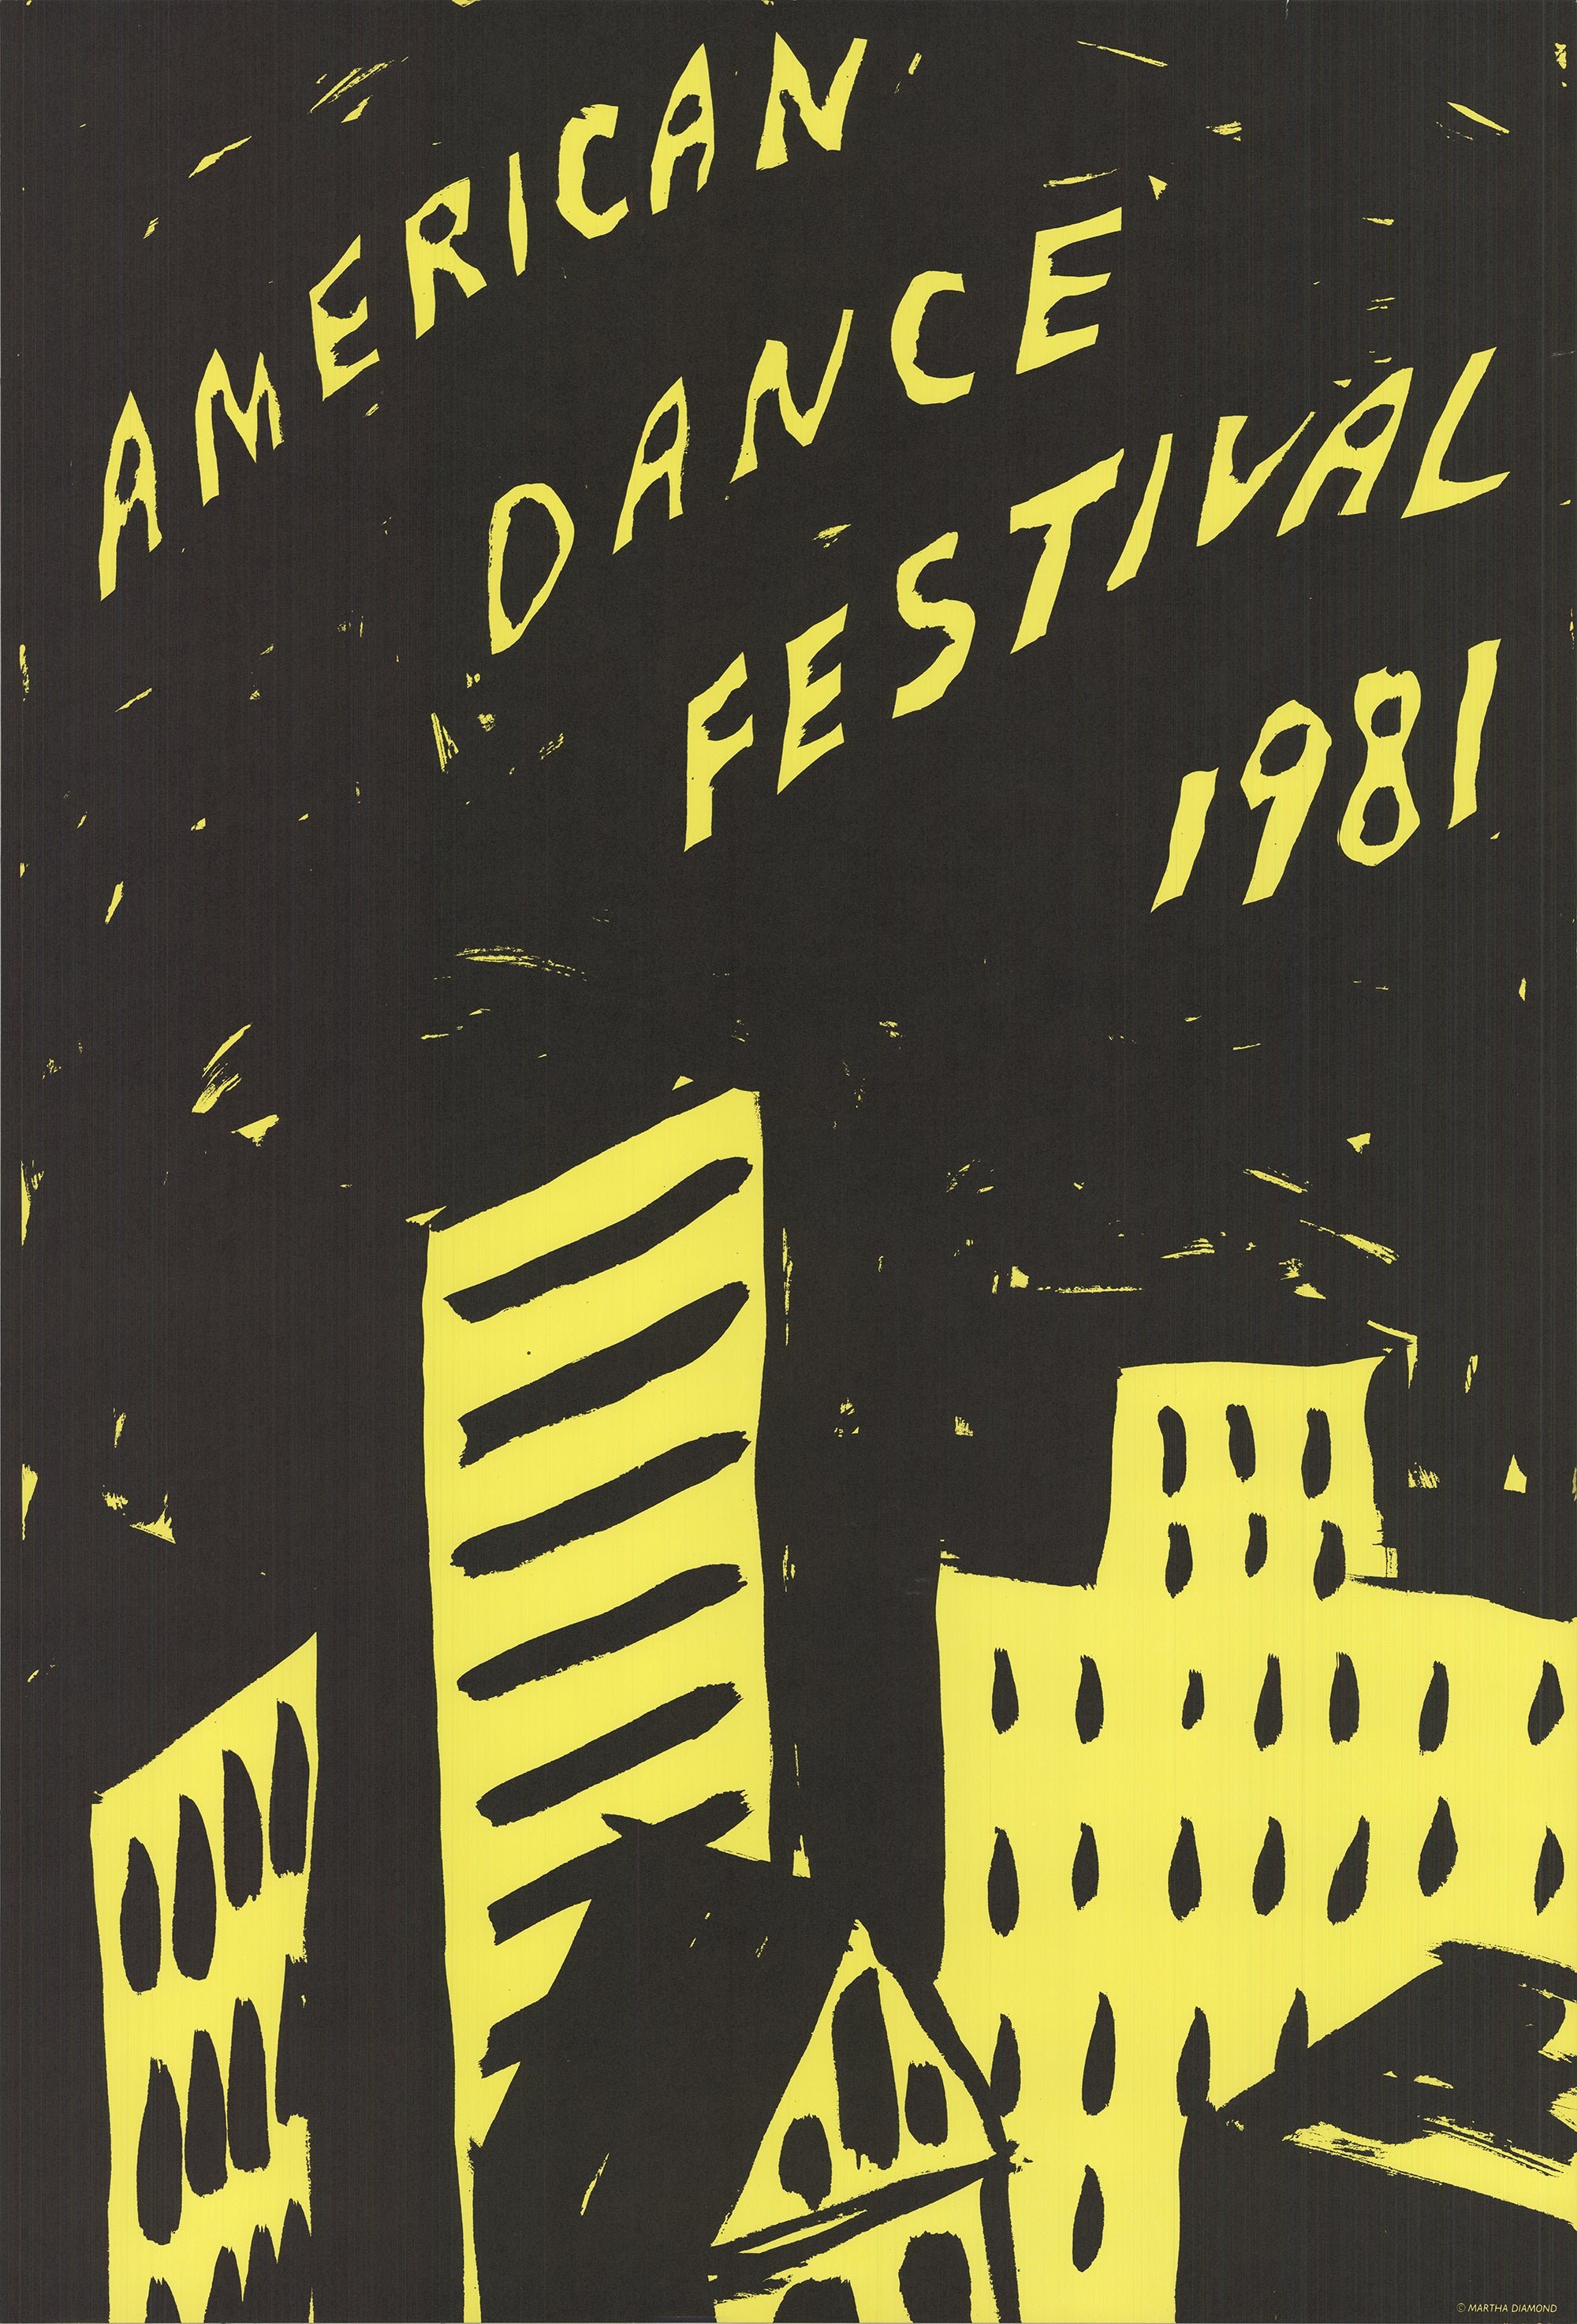   American Dance Festival 1981 . Lithograph, edition of 150. 35.75 x 24 in. 